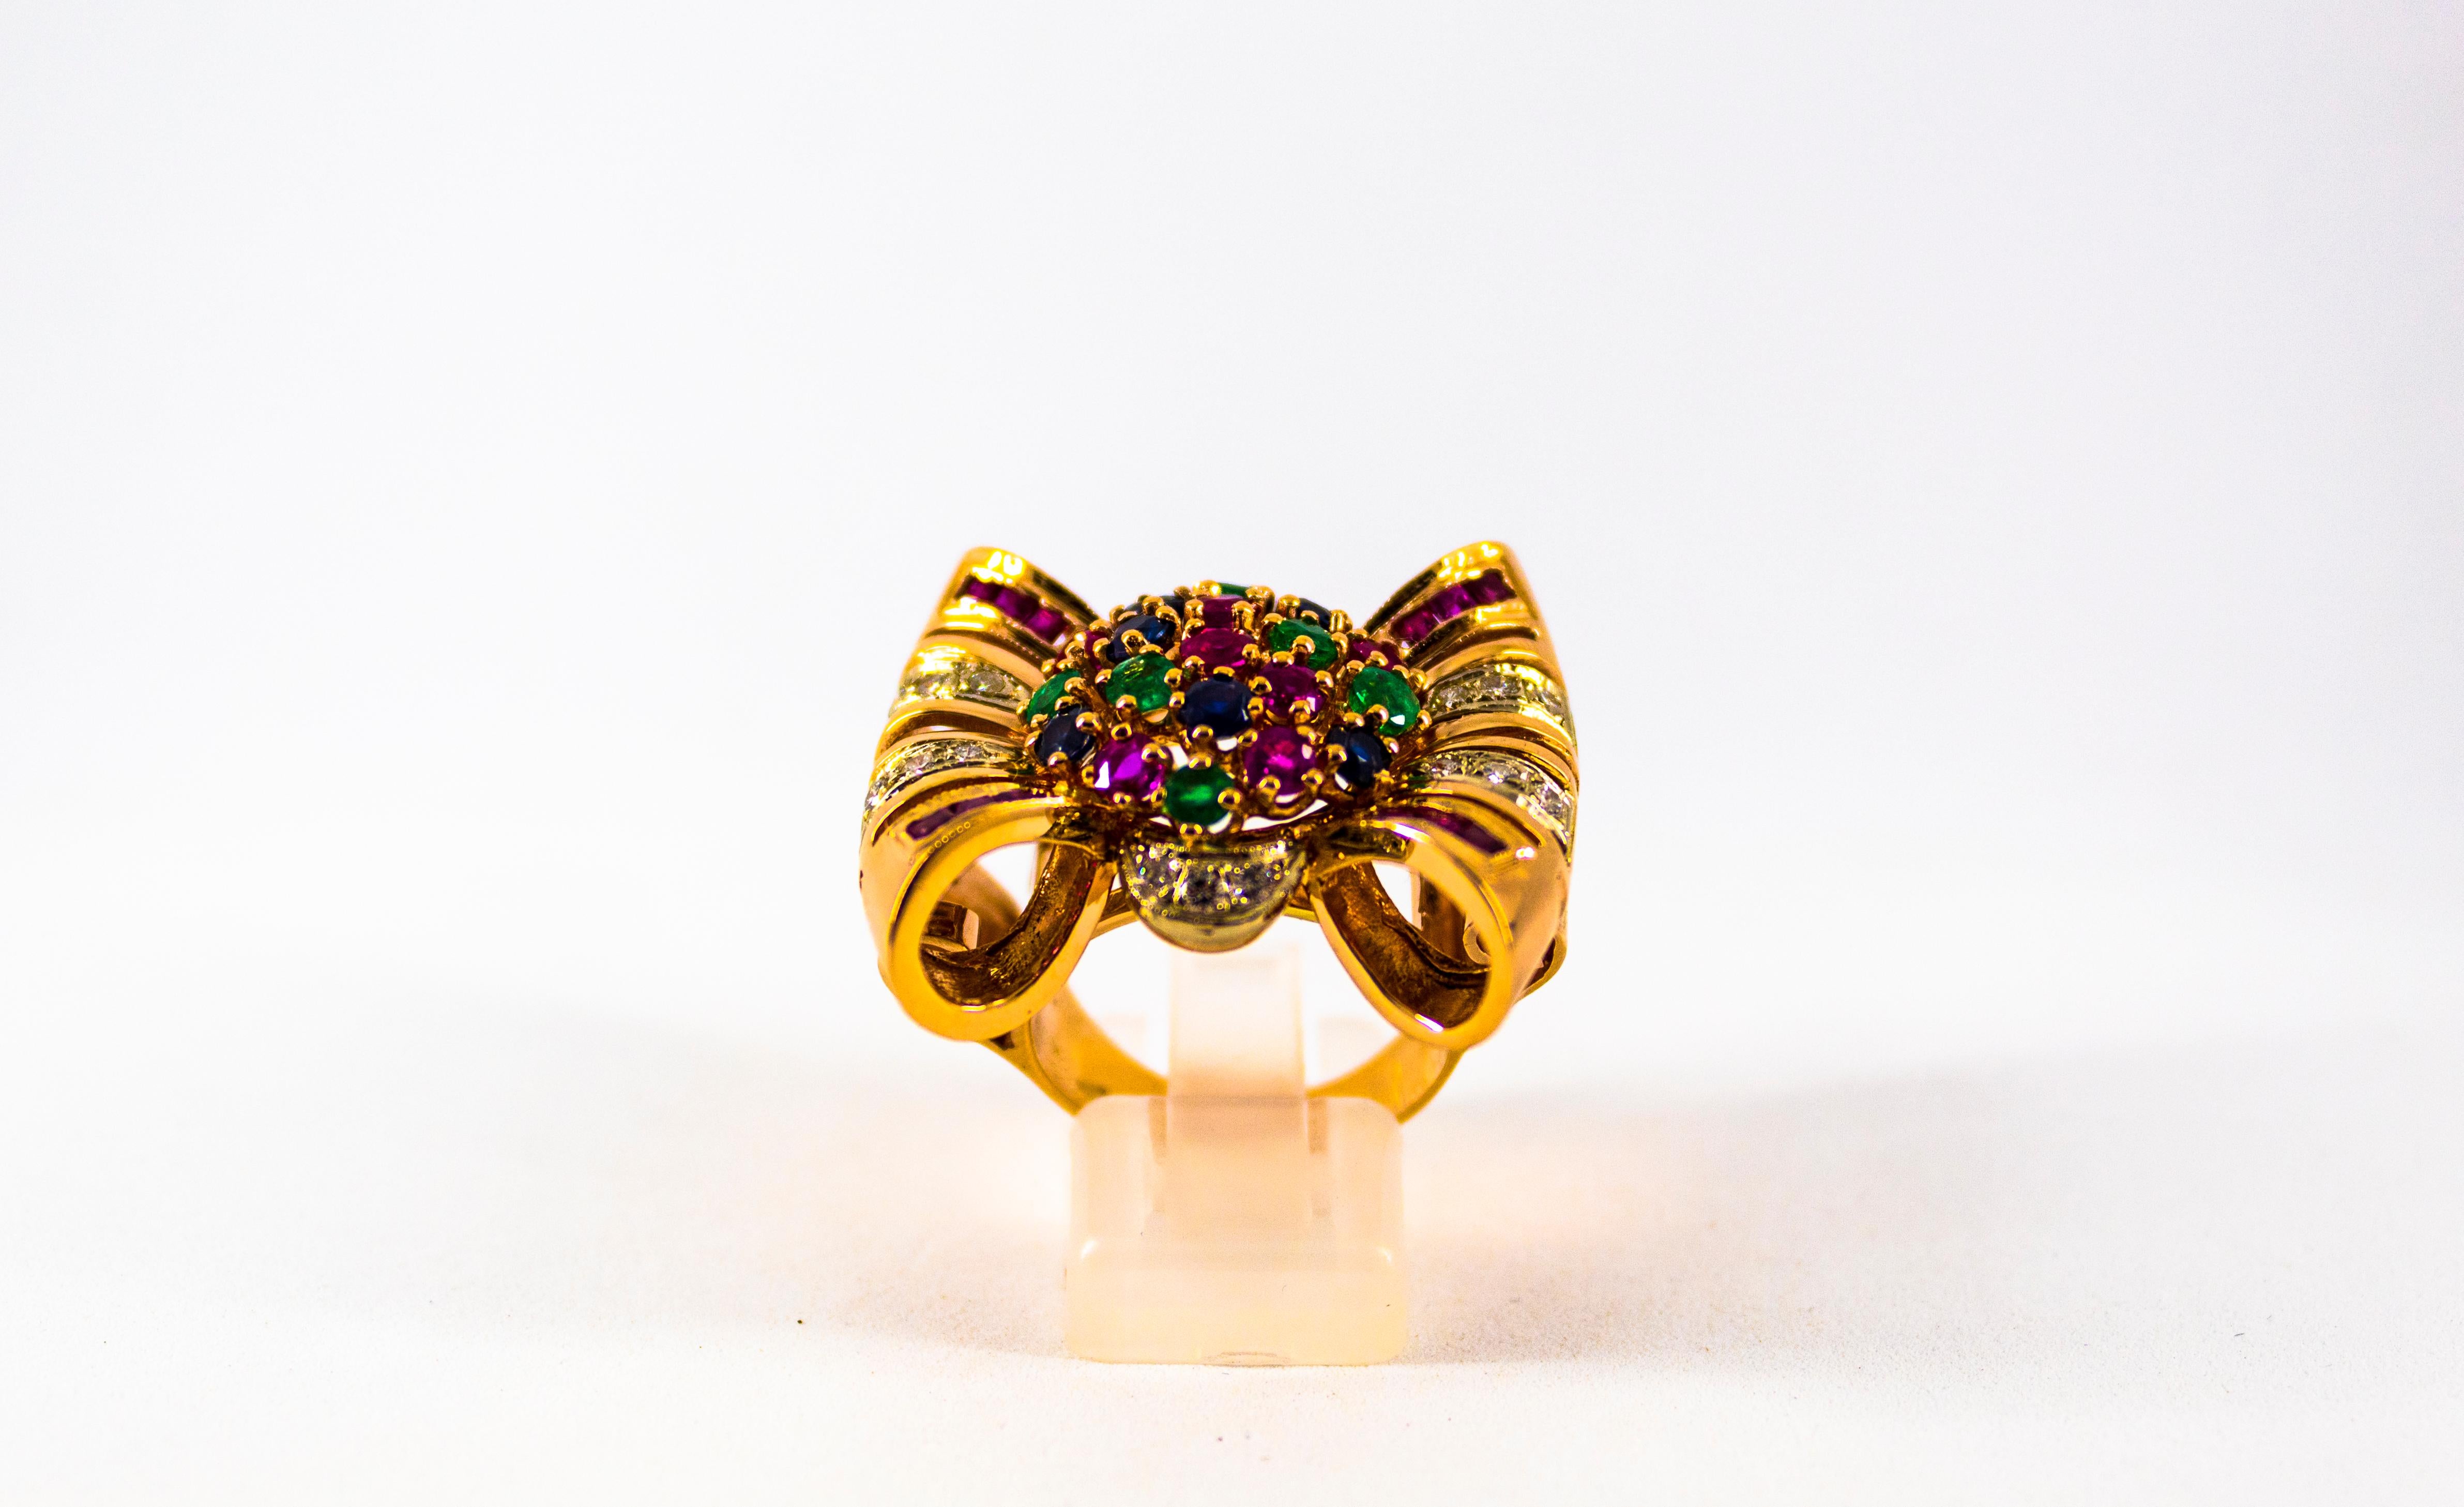 This Ring is made of 14K Yellow Gold.
This Ring has 0.30 Carats of White Diamonds.
This Ring has 0.85 Carats of Rubies.
This Ring has 0.65 Carats of Blue Sapphires.
This Ring has 0.50 Carats of Emeralds.
Size ITA: 16 USA: 7 1/2
We're a workshop so